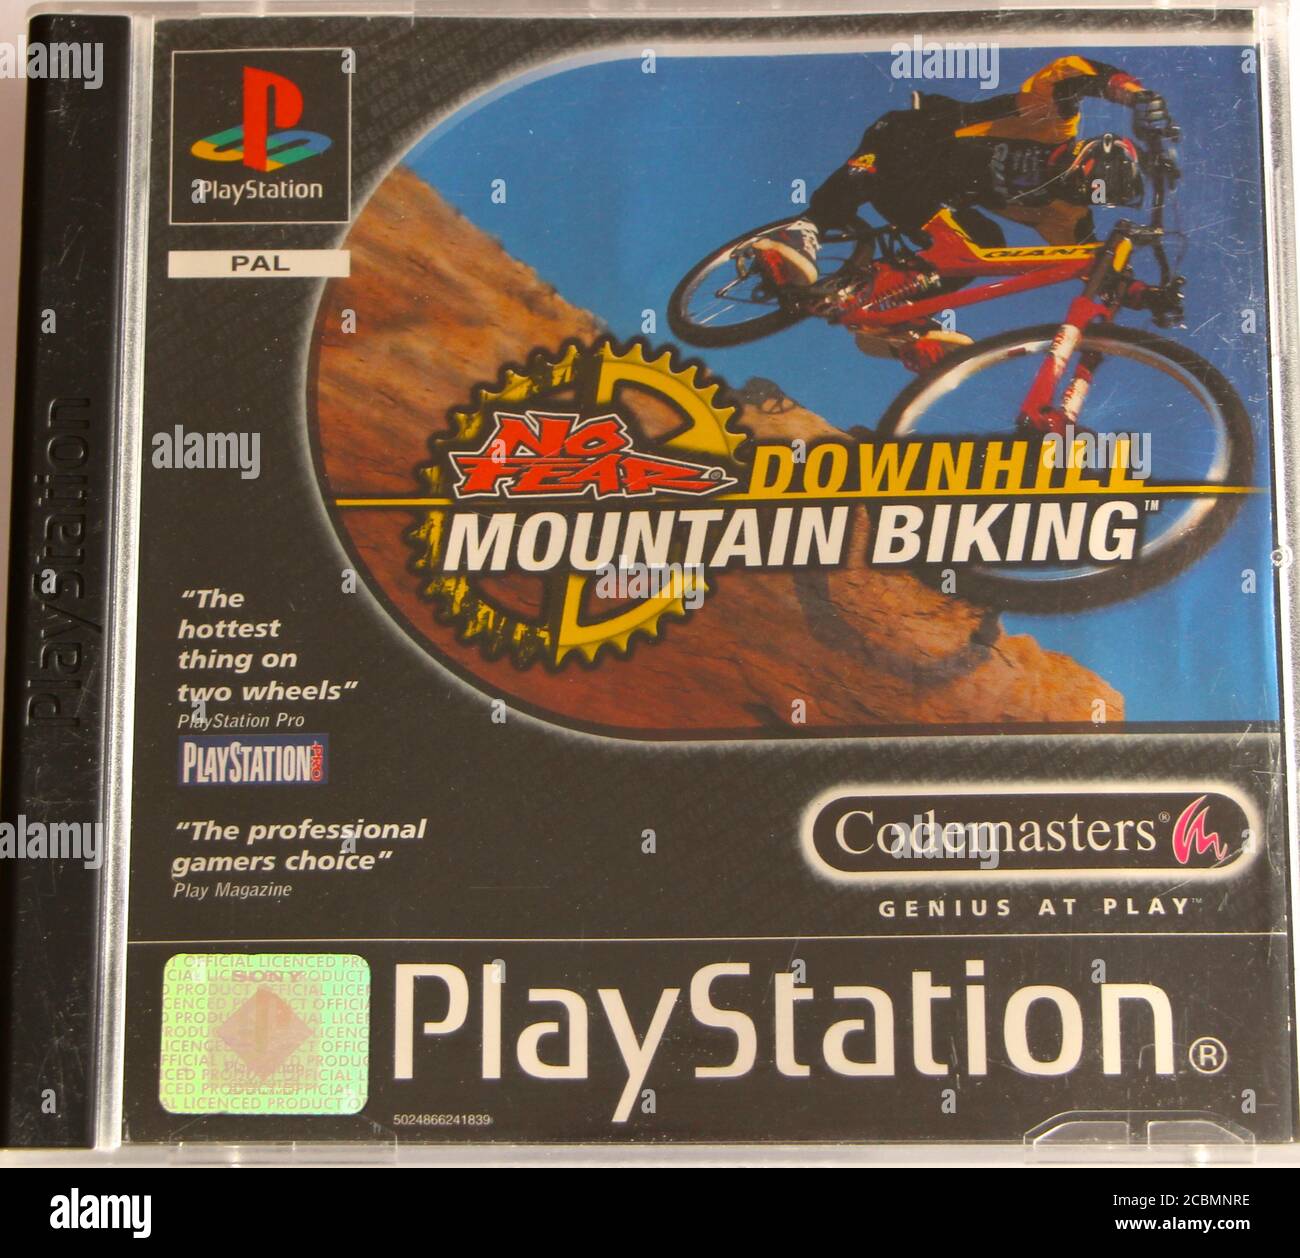 Photo of an Original Playstation 1 CD box and cover for No fear Downhill  mountain biking by Codemasters Stock Photo - Alamy